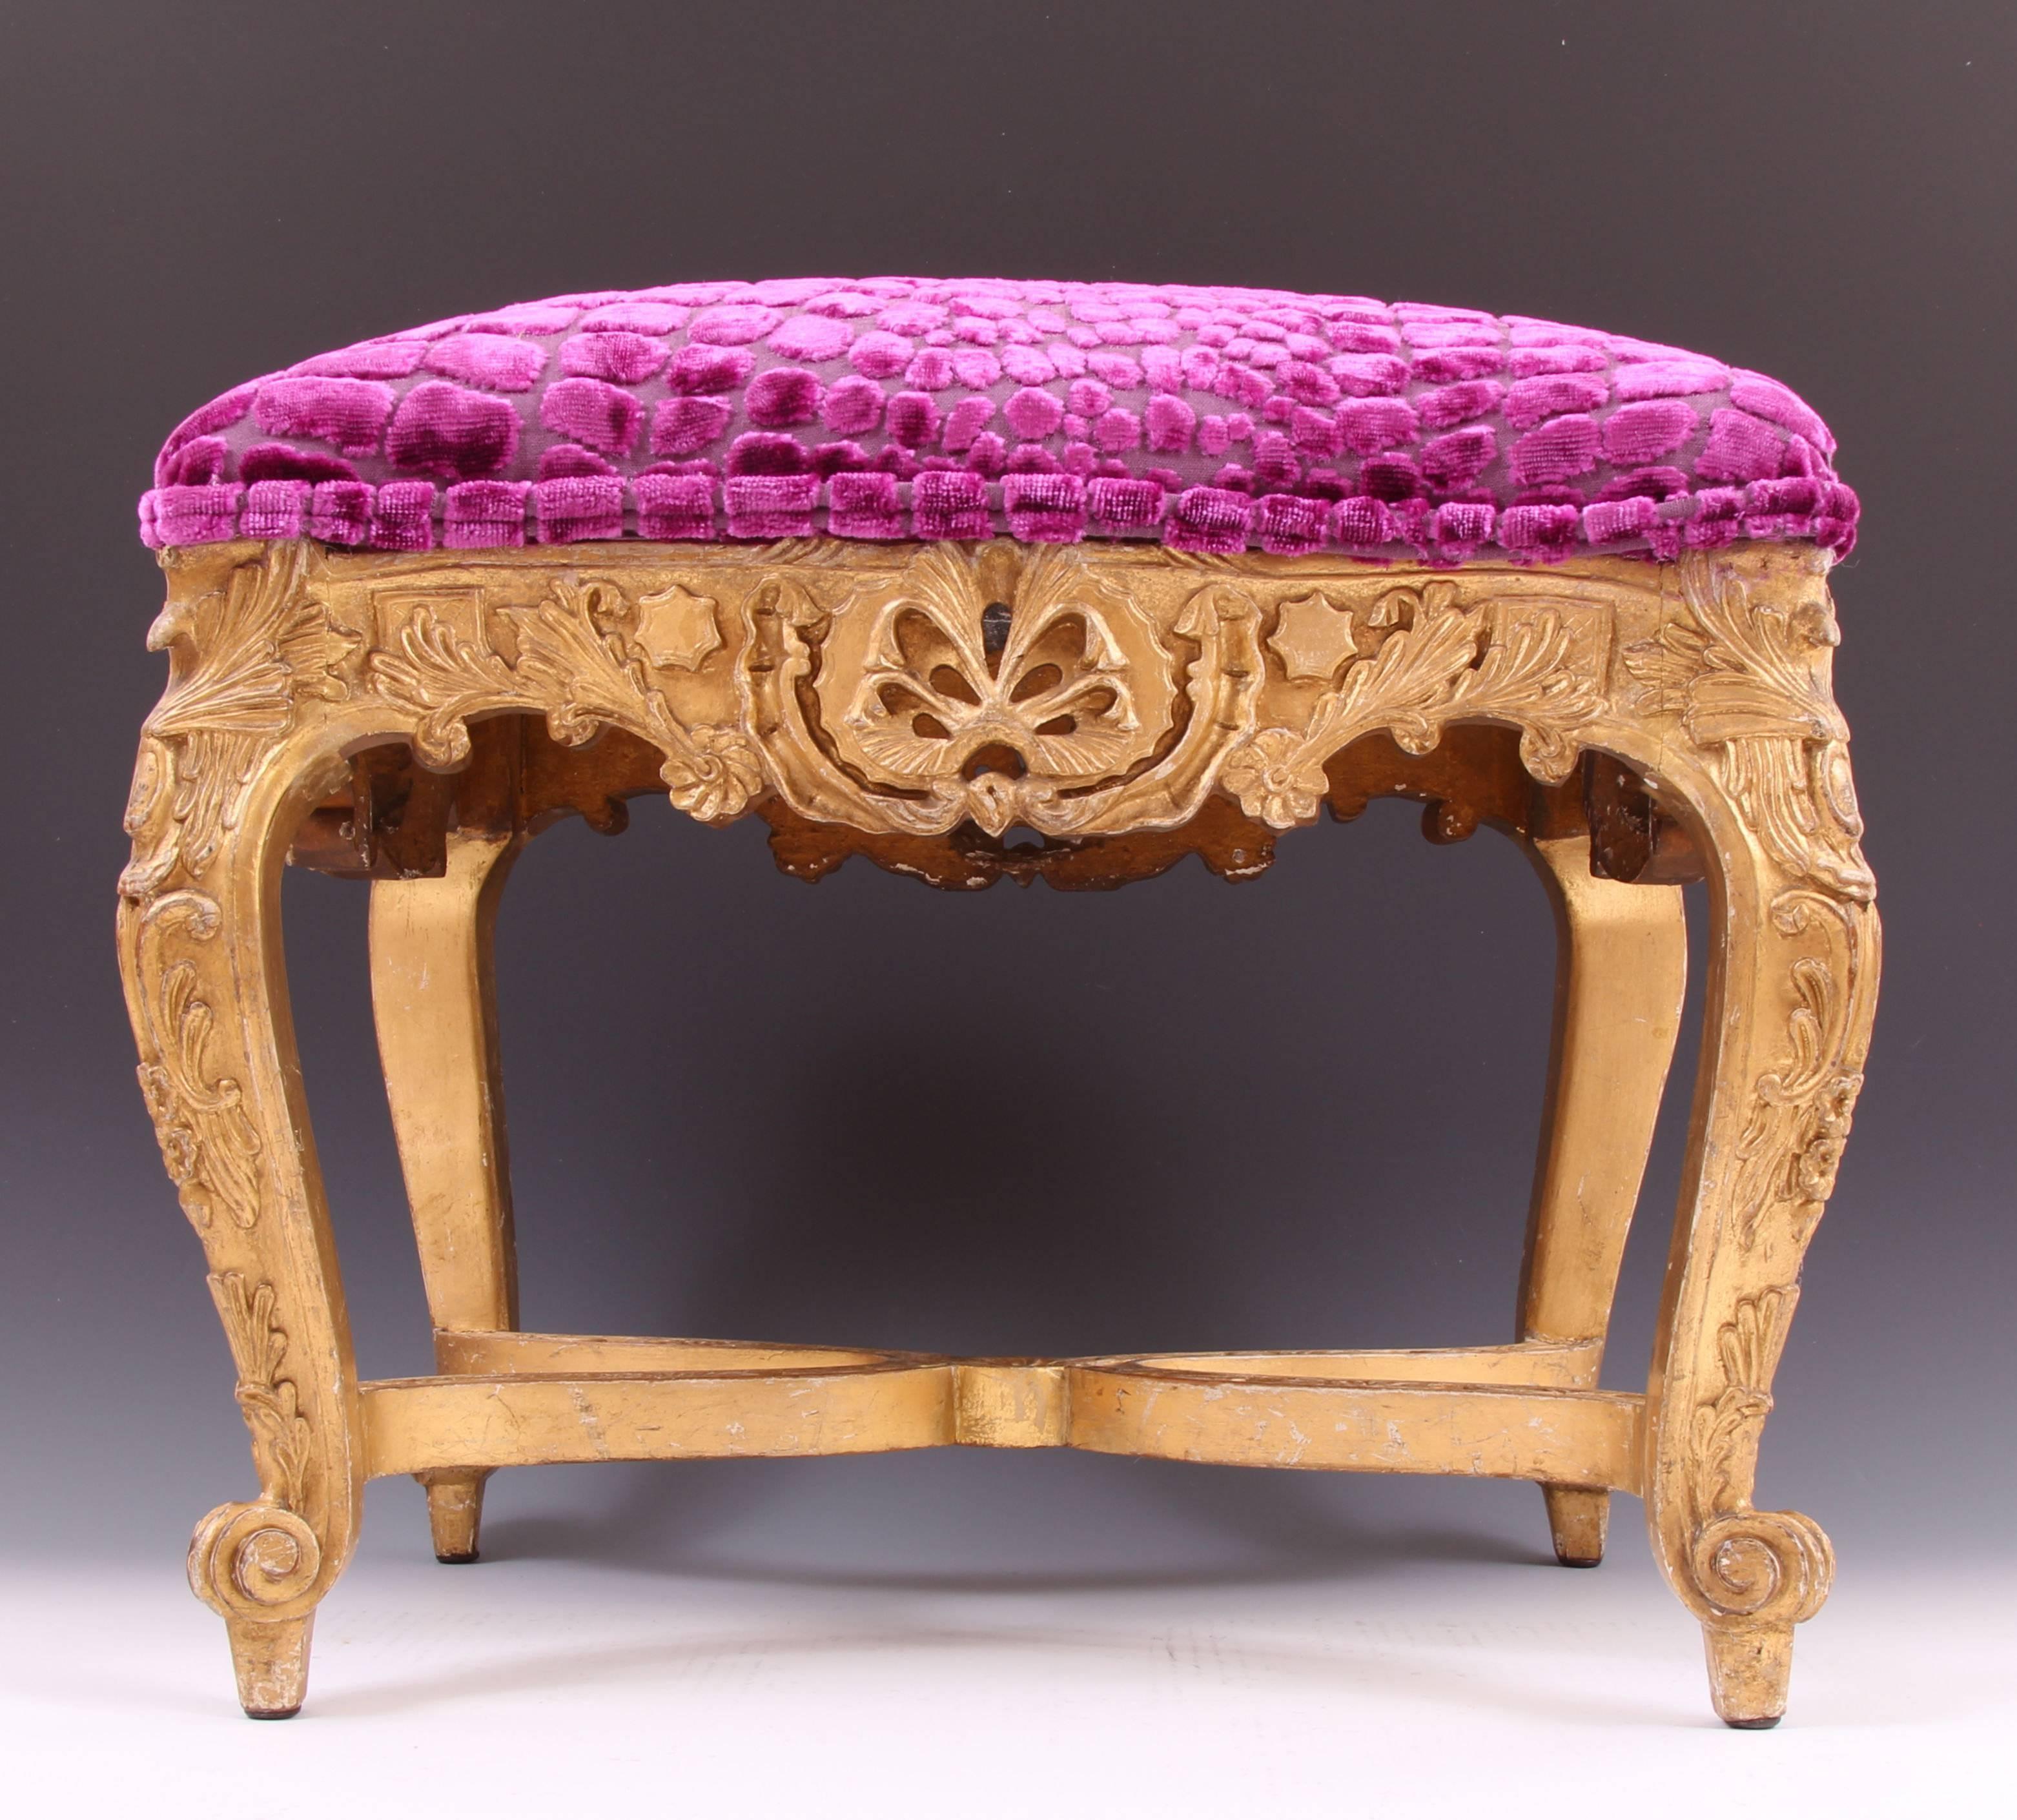 Important and rare early Louis XV giltwood serpentine tabouret, circa 1735. The carving, attention to detail & palatial quality of this splendid piece is absolutely superb. Covered in the finest fabric, patterned with a beautiful Royal fuchsia /